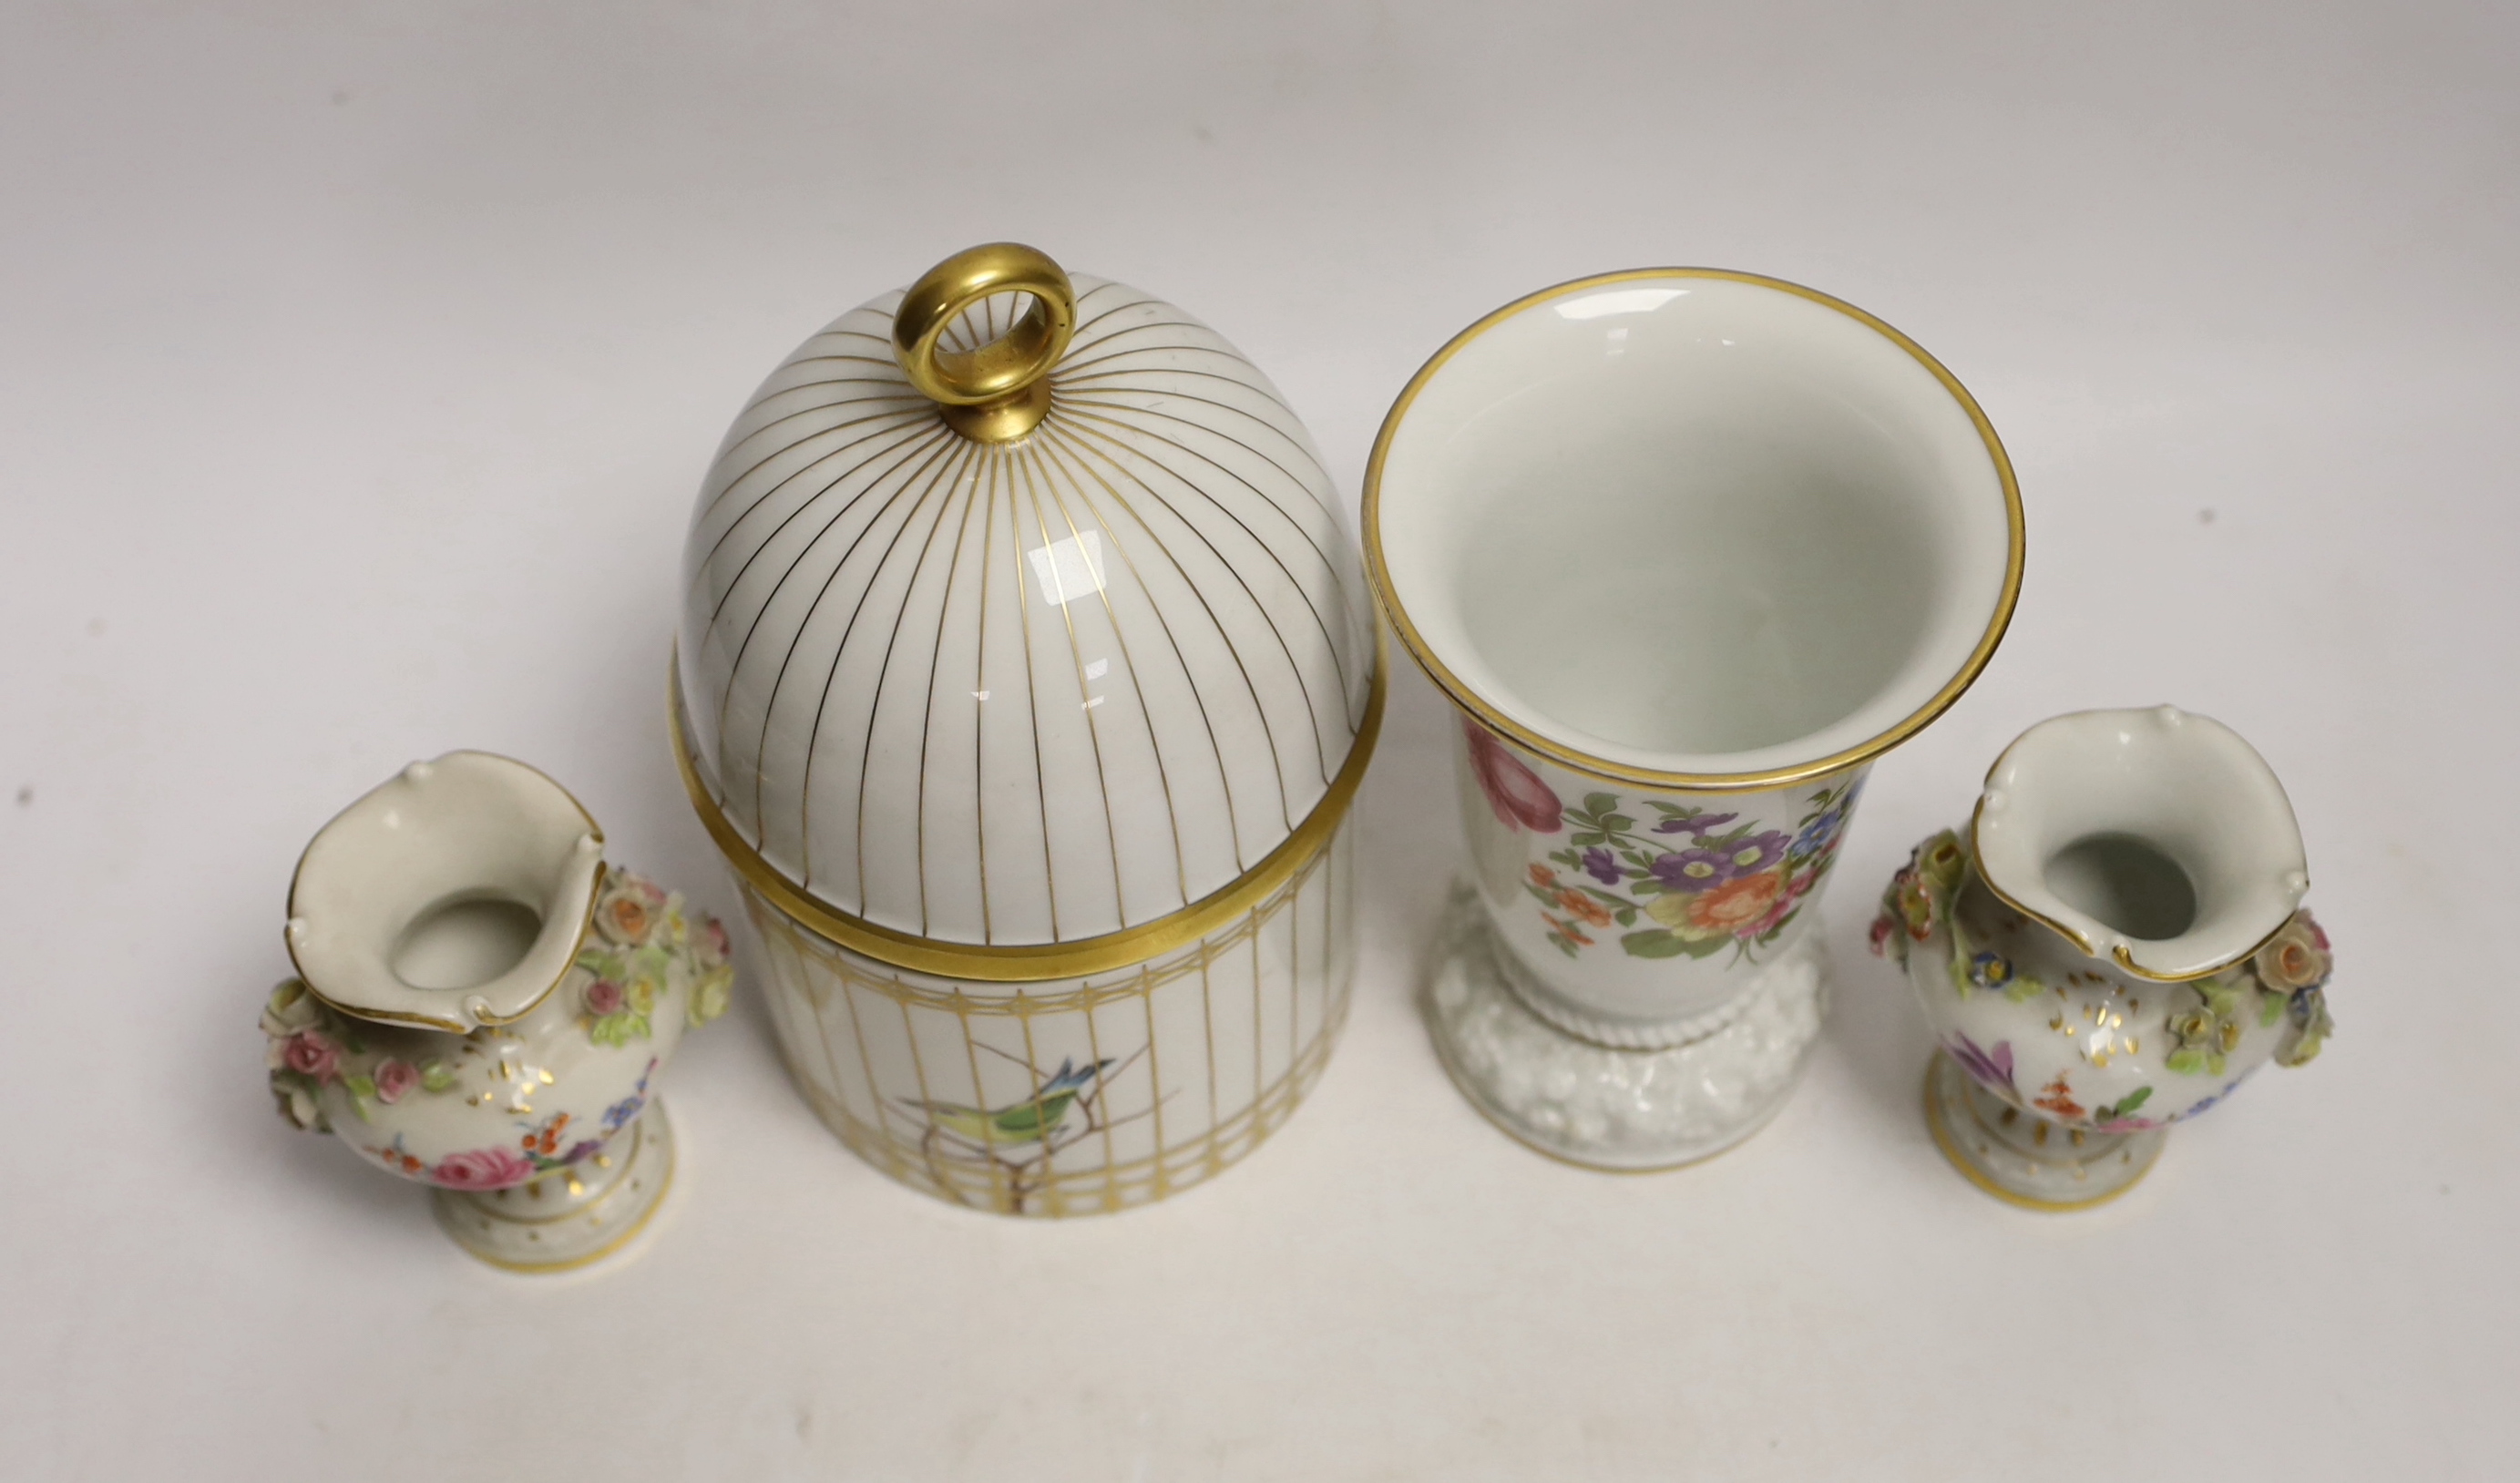 A pair of Meissen flower encrusted vases, a Rosenthal 'birdcage' jar and cover and a Rosenthal vase, tallest 19.5cm